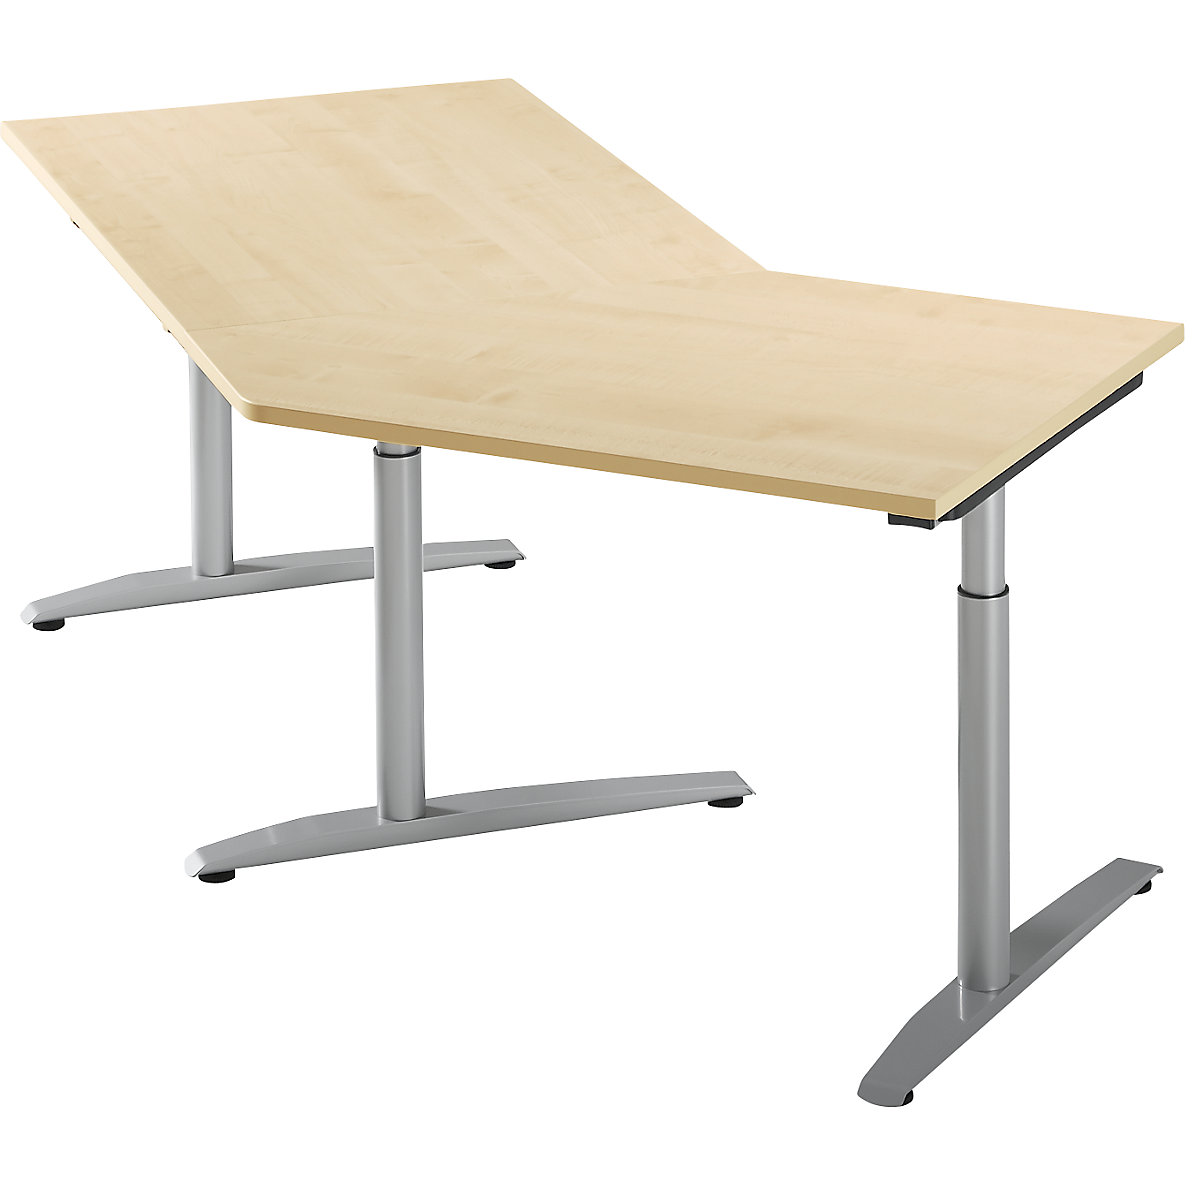 Add-on table, height adjustable from 680 – 820 mm HANNA